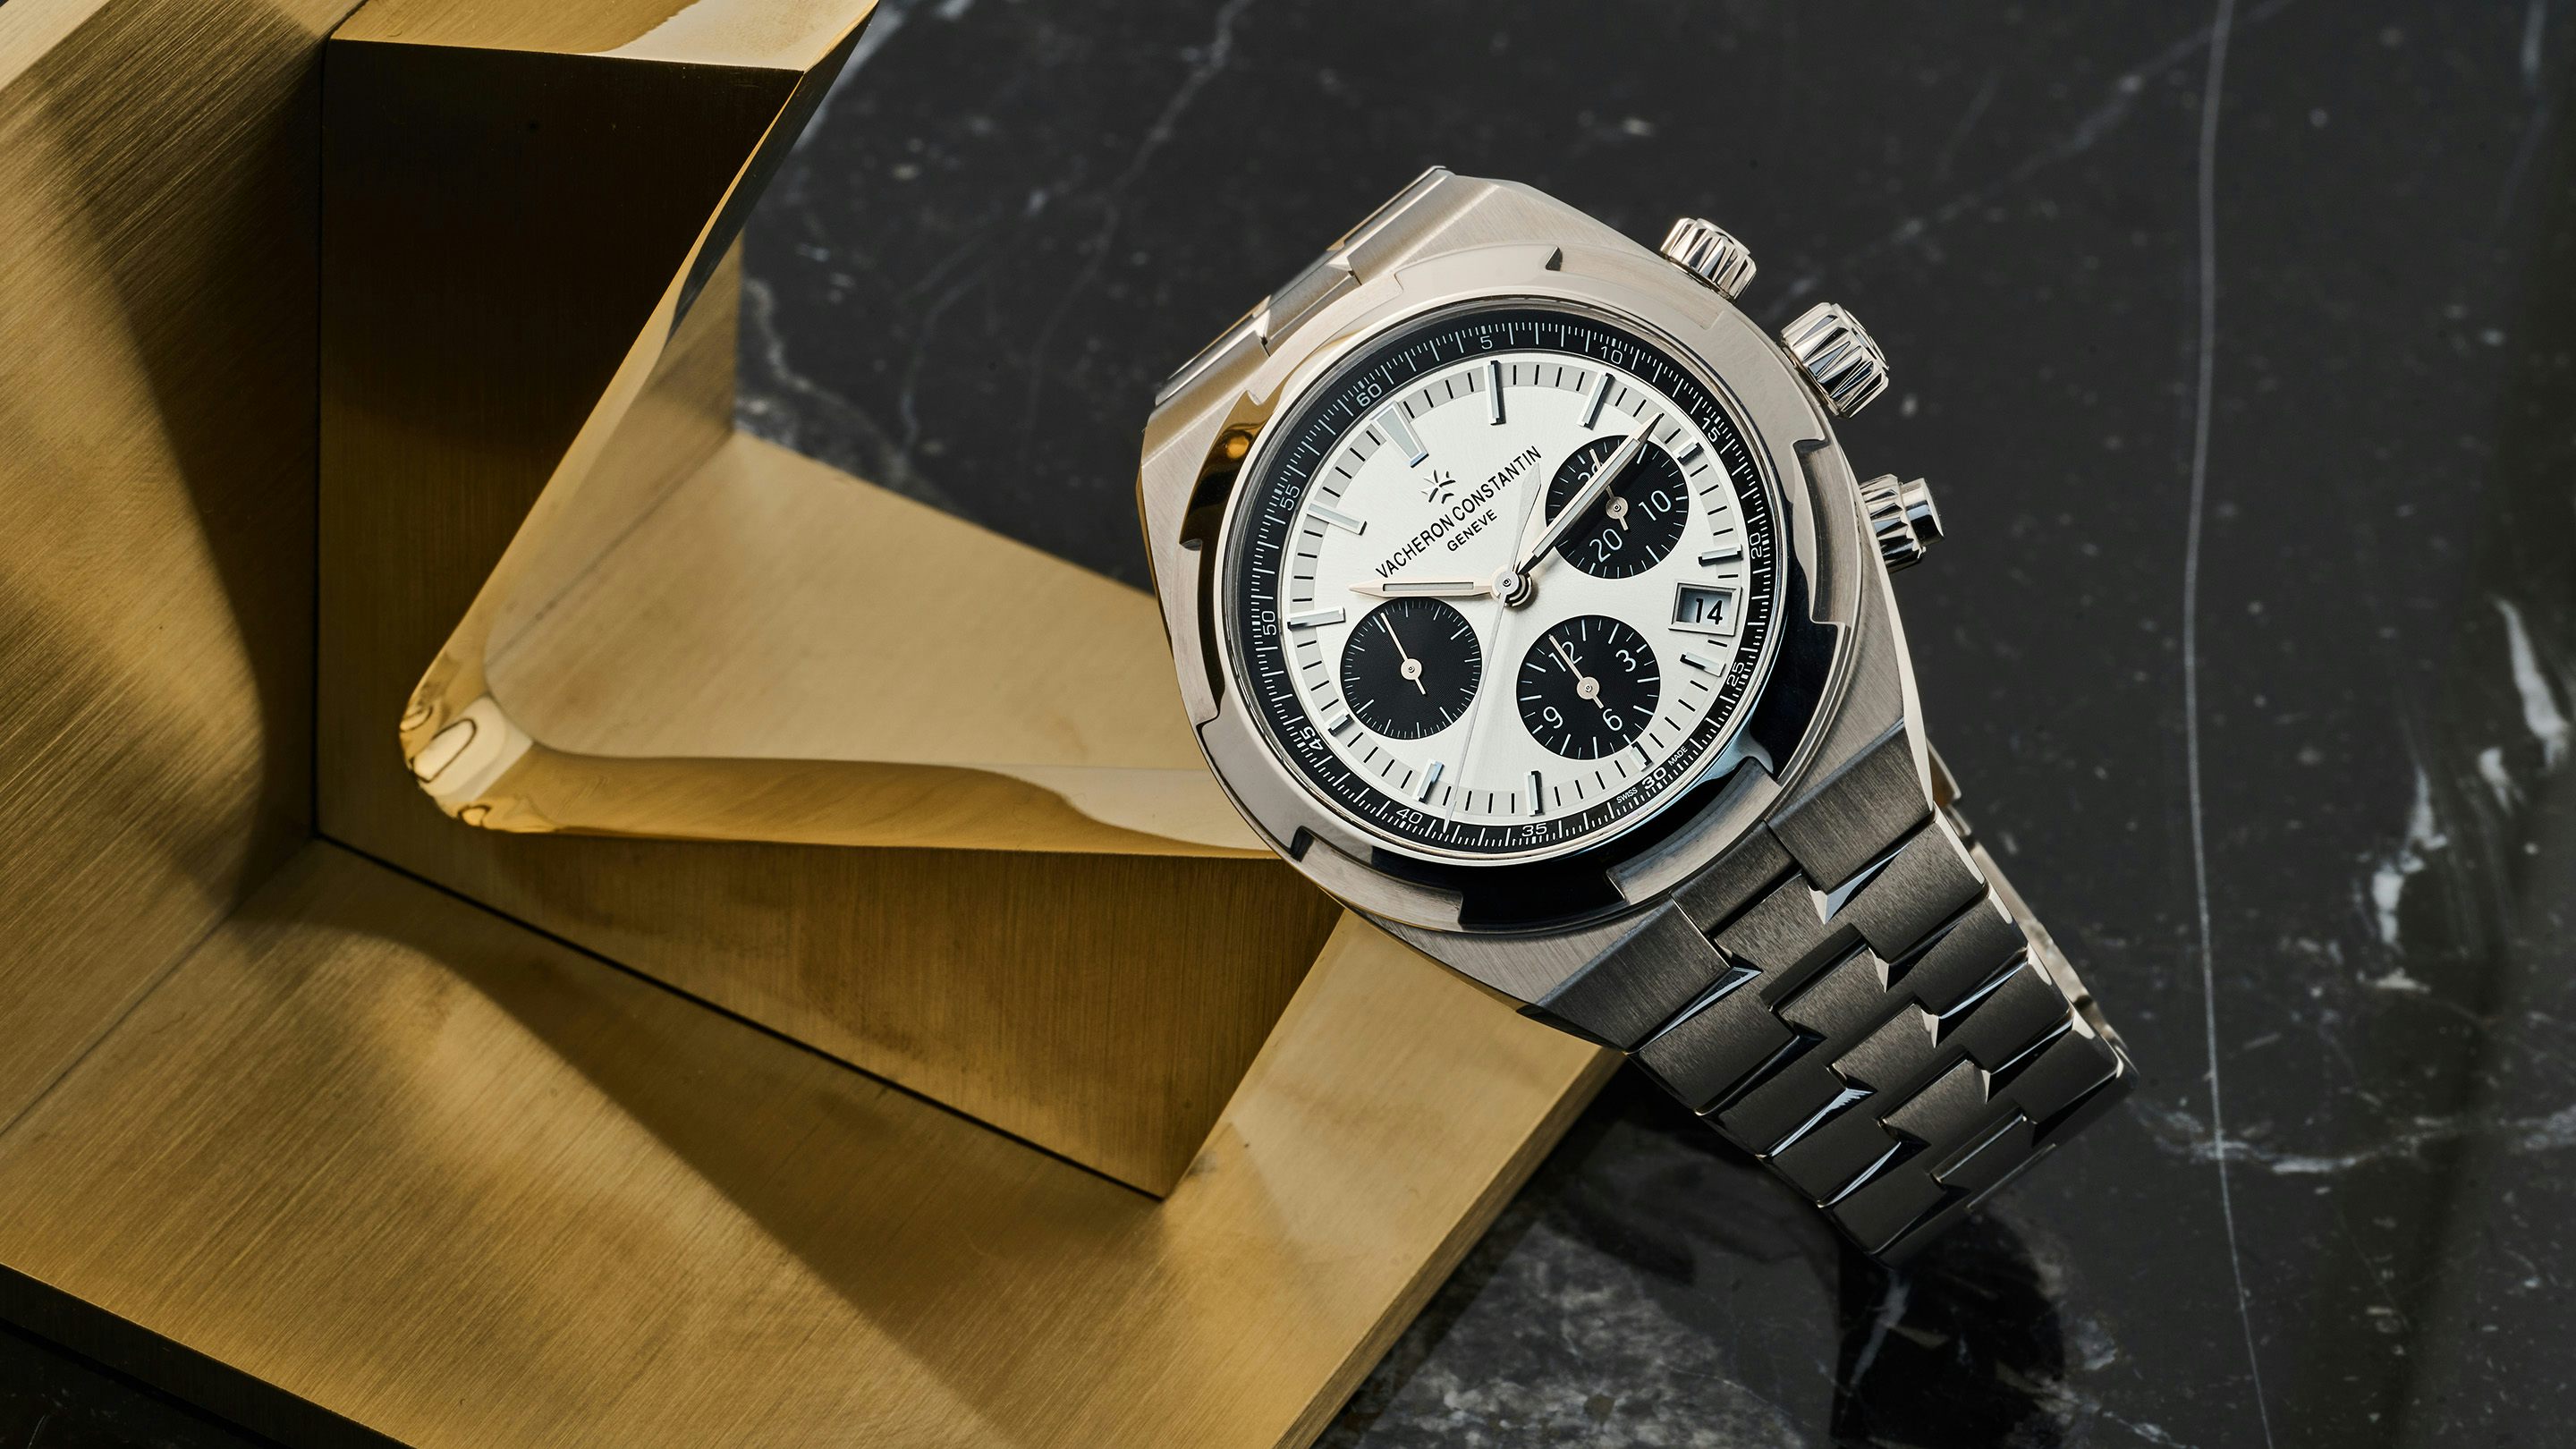 Teddy Baldassarre on X: A luxury sports chronograph that didn't get the  attention it deserved when it was released earlier this year, the Vacheron  Constantin Overseas Panda Chronograph. What are your thoughts